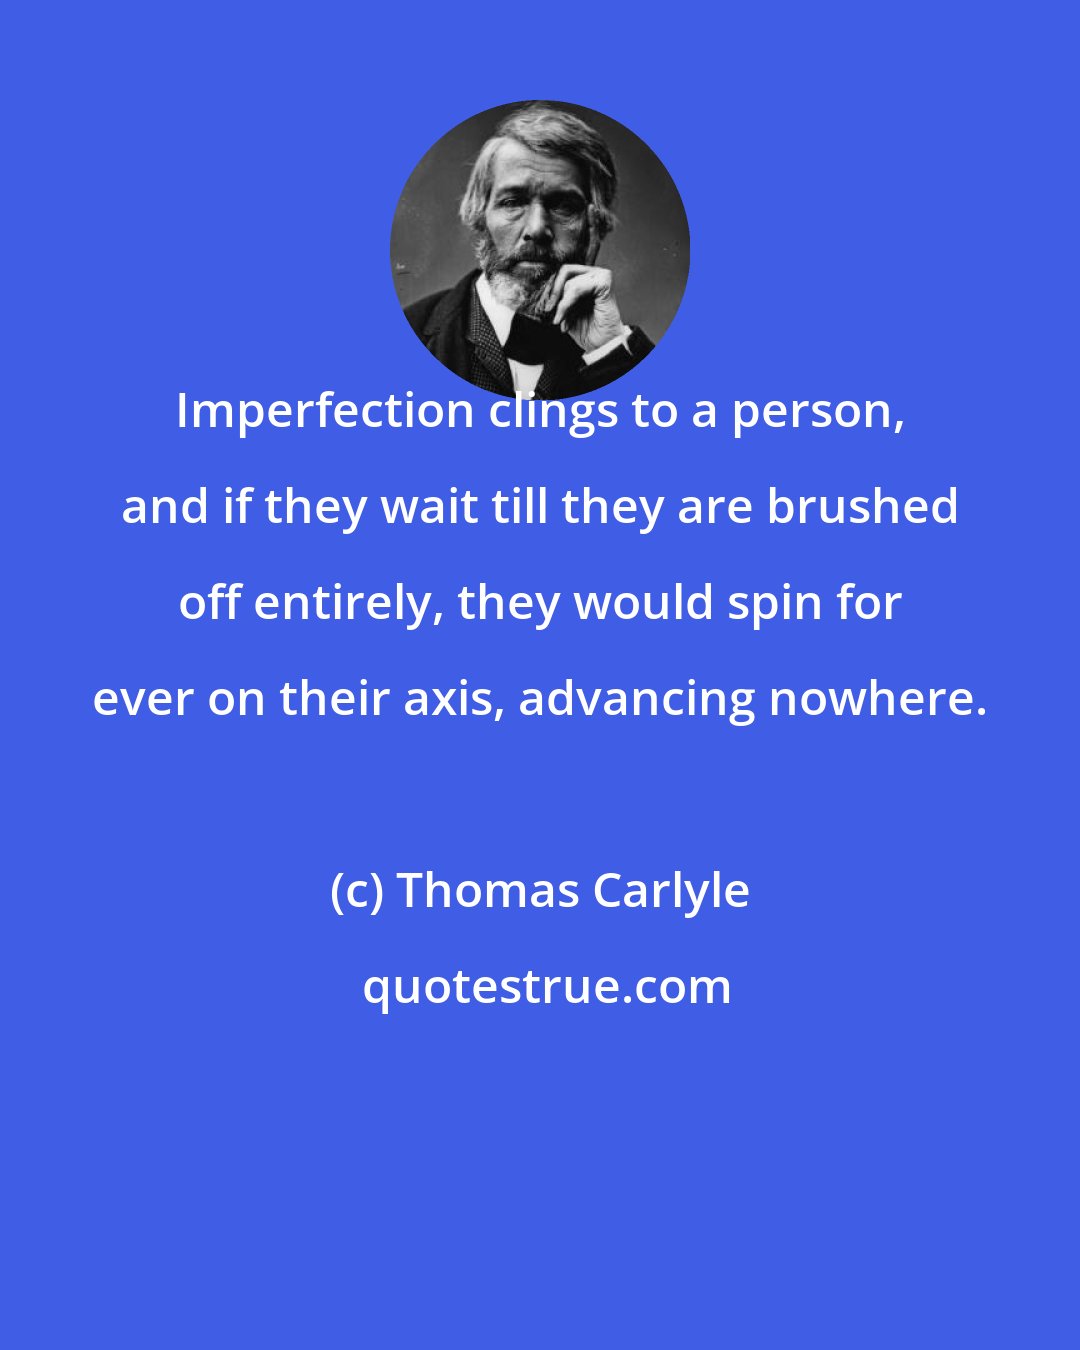 Thomas Carlyle: Imperfection clings to a person, and if they wait till they are brushed off entirely, they would spin for ever on their axis, advancing nowhere.